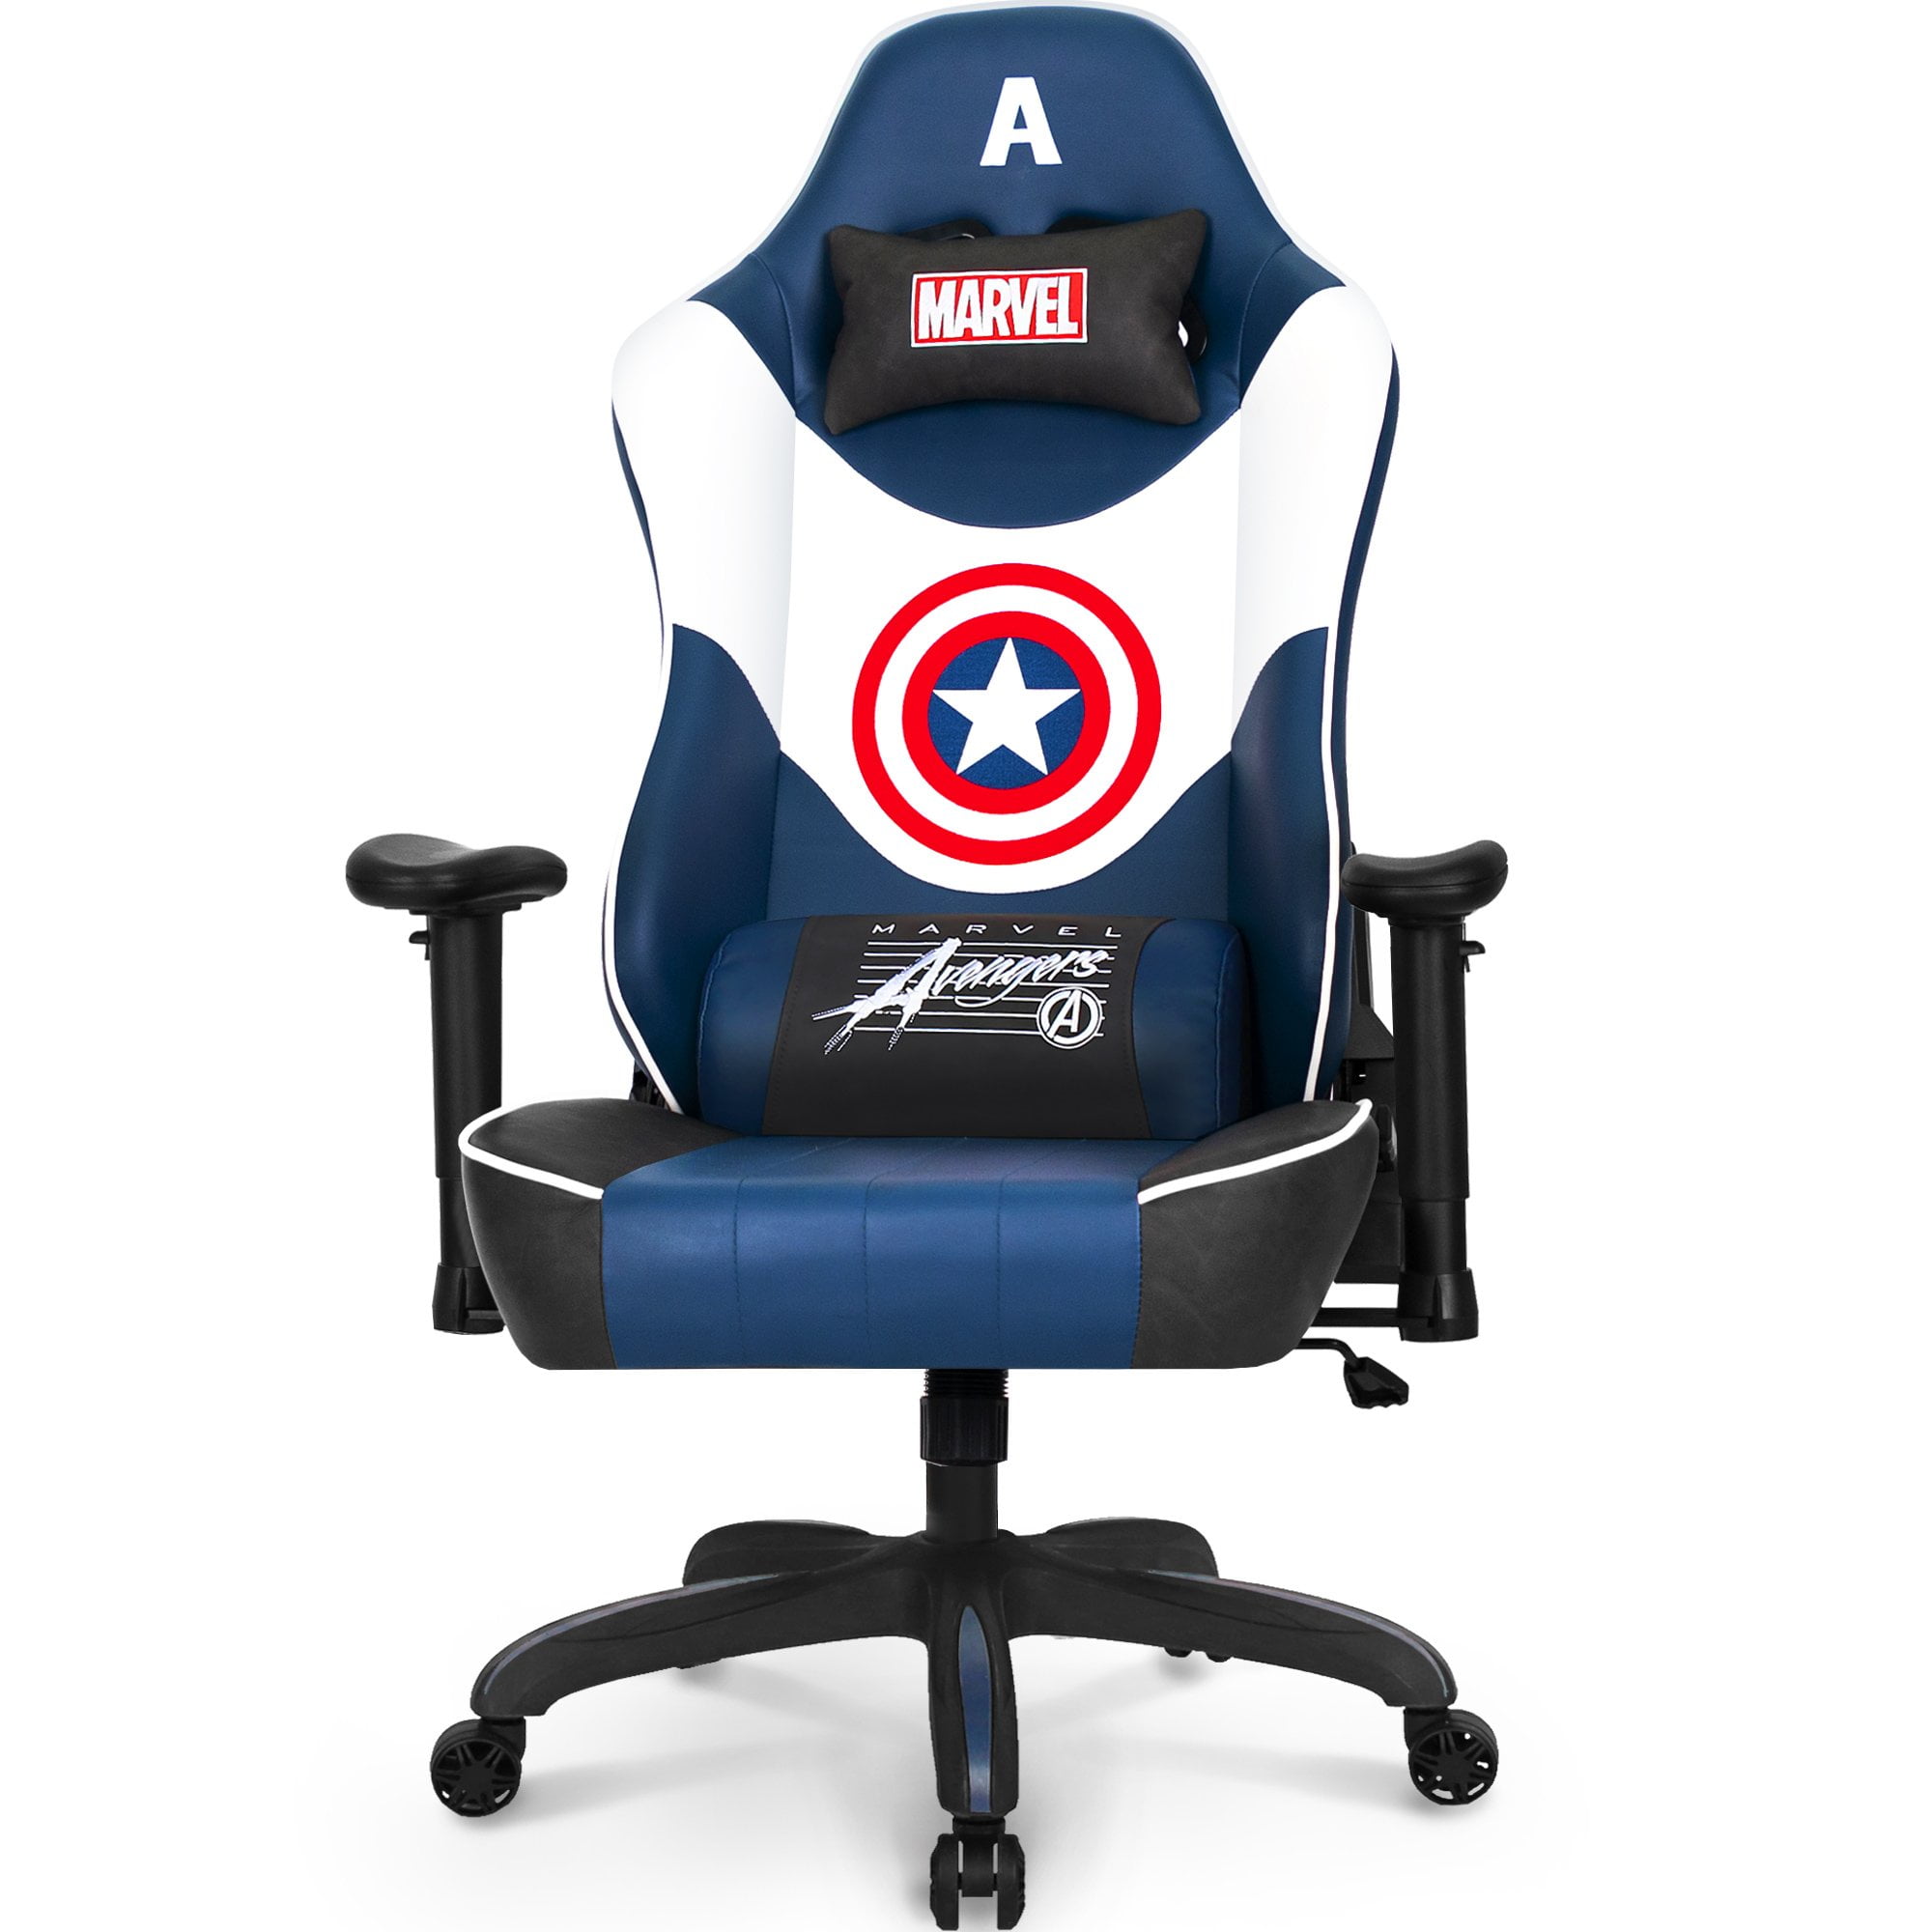 NEO CHAIR Licensed Marvel Multi-Use Stool w/Wheel 1 Year Warranty Video Game Stool Gaming Chair Stool Footstool Simple Chair Footrest Meeting Chair Swivel Height Adjustable Black Panter